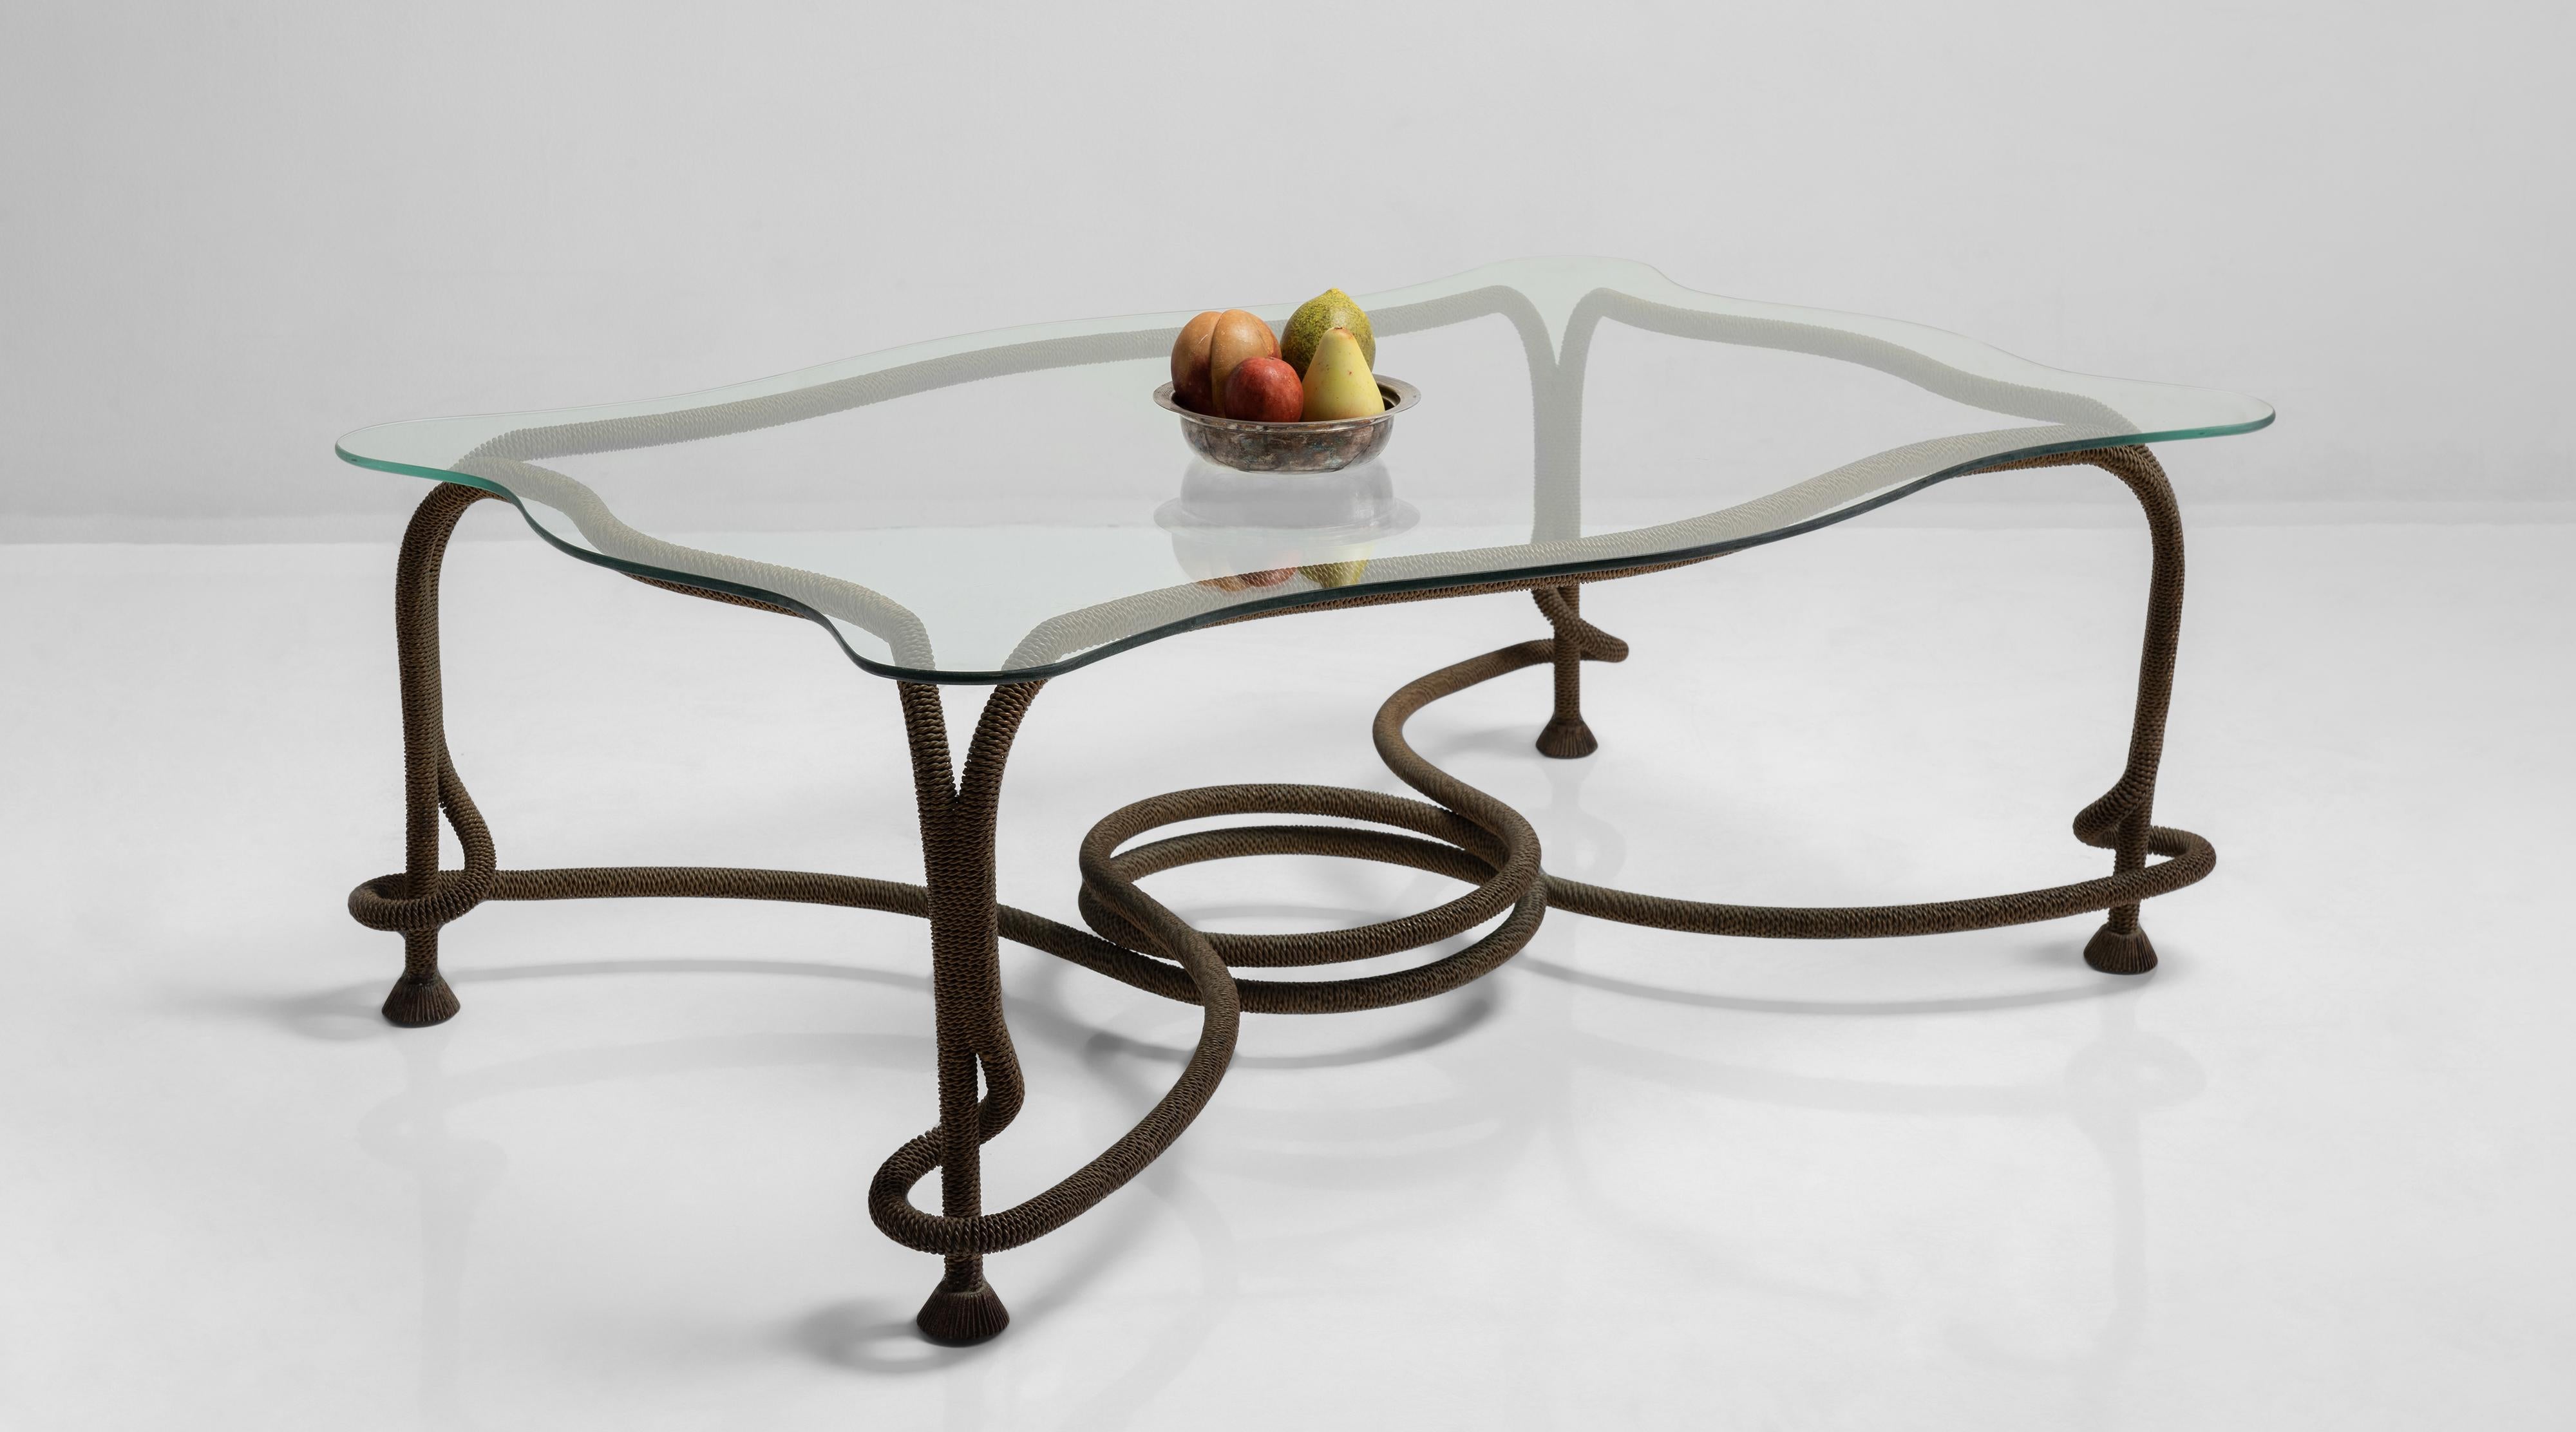 Glass and gilded metal coffee table by Emilio Rey, Spain, circa 1970.

Decorative, curved glass top on gilt metal base in the form of twisted tasseled rope.